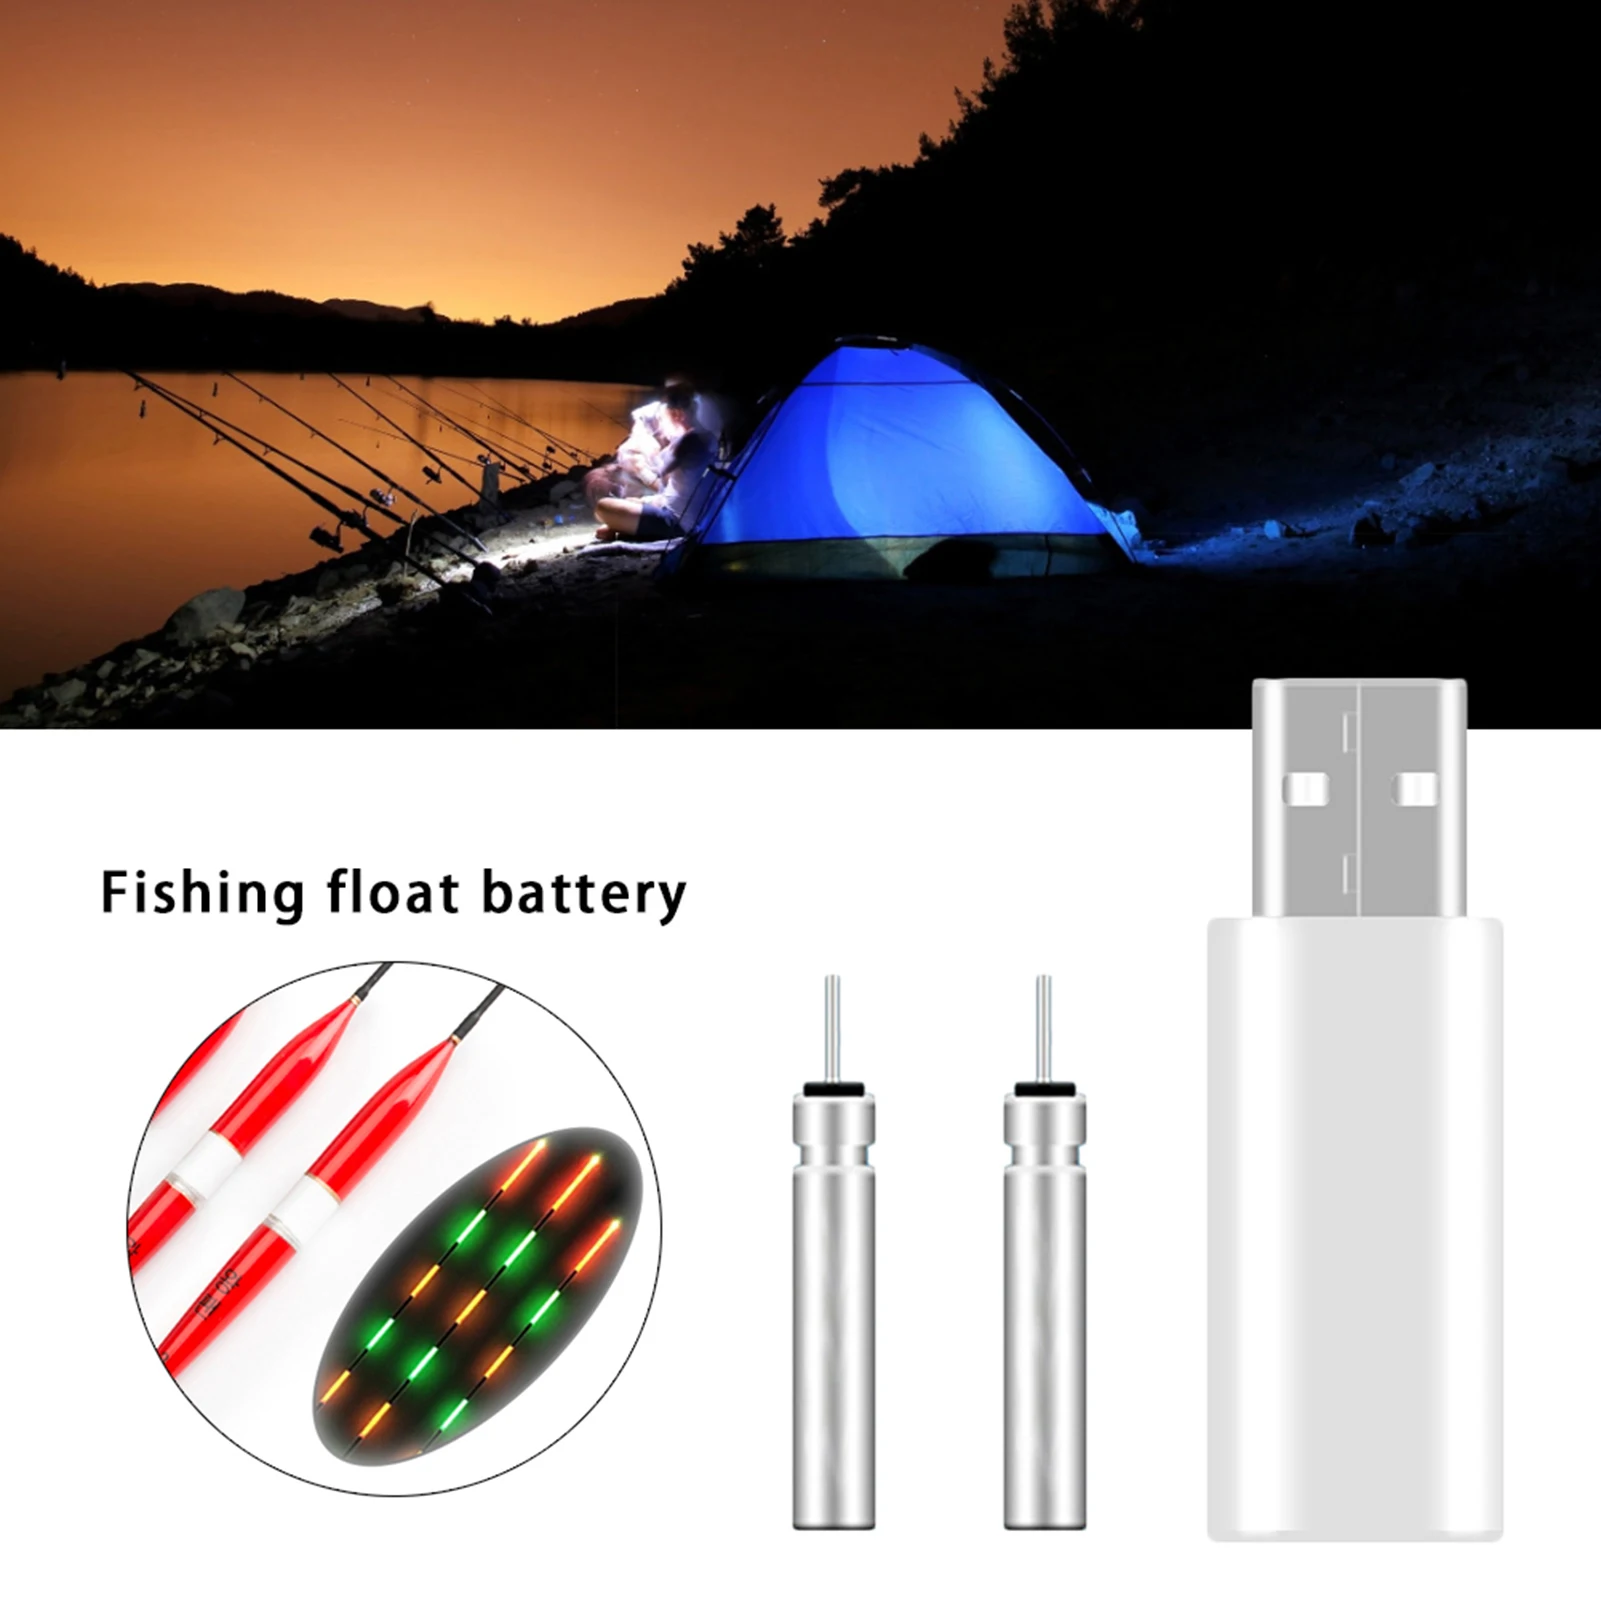 

Fishing Floats Electric Floats Rechargeable CR425 Battery Fishing Float Accessory Suit for Different Charger Devices